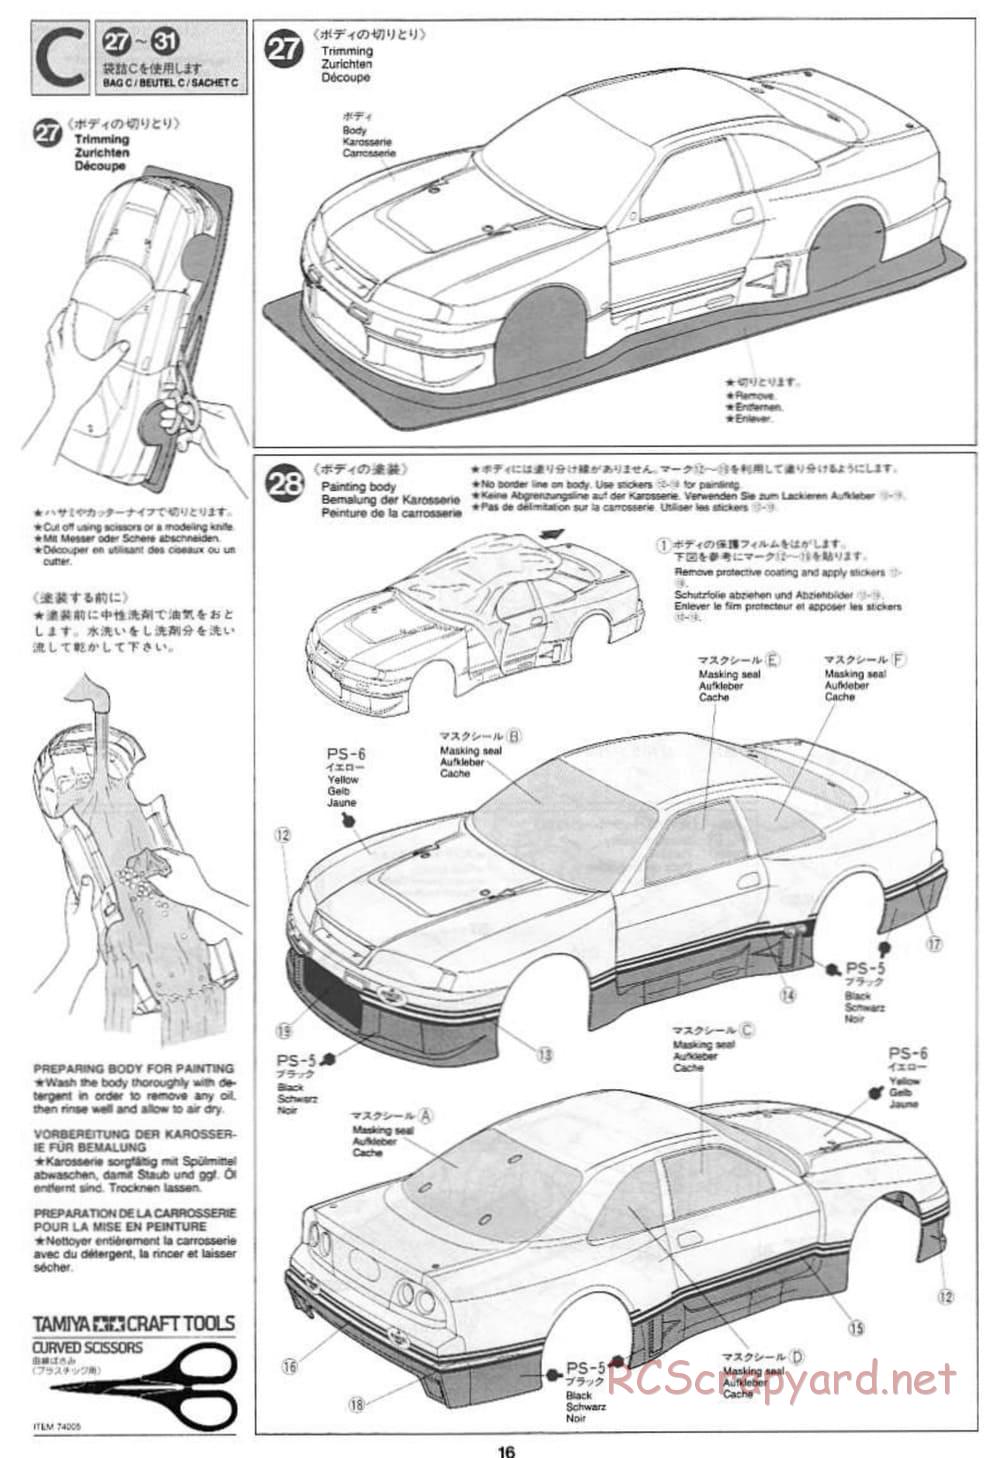 Tamiya - Pennzoil Nismo GT-R - TL-01 Chassis - Manual - Page 16